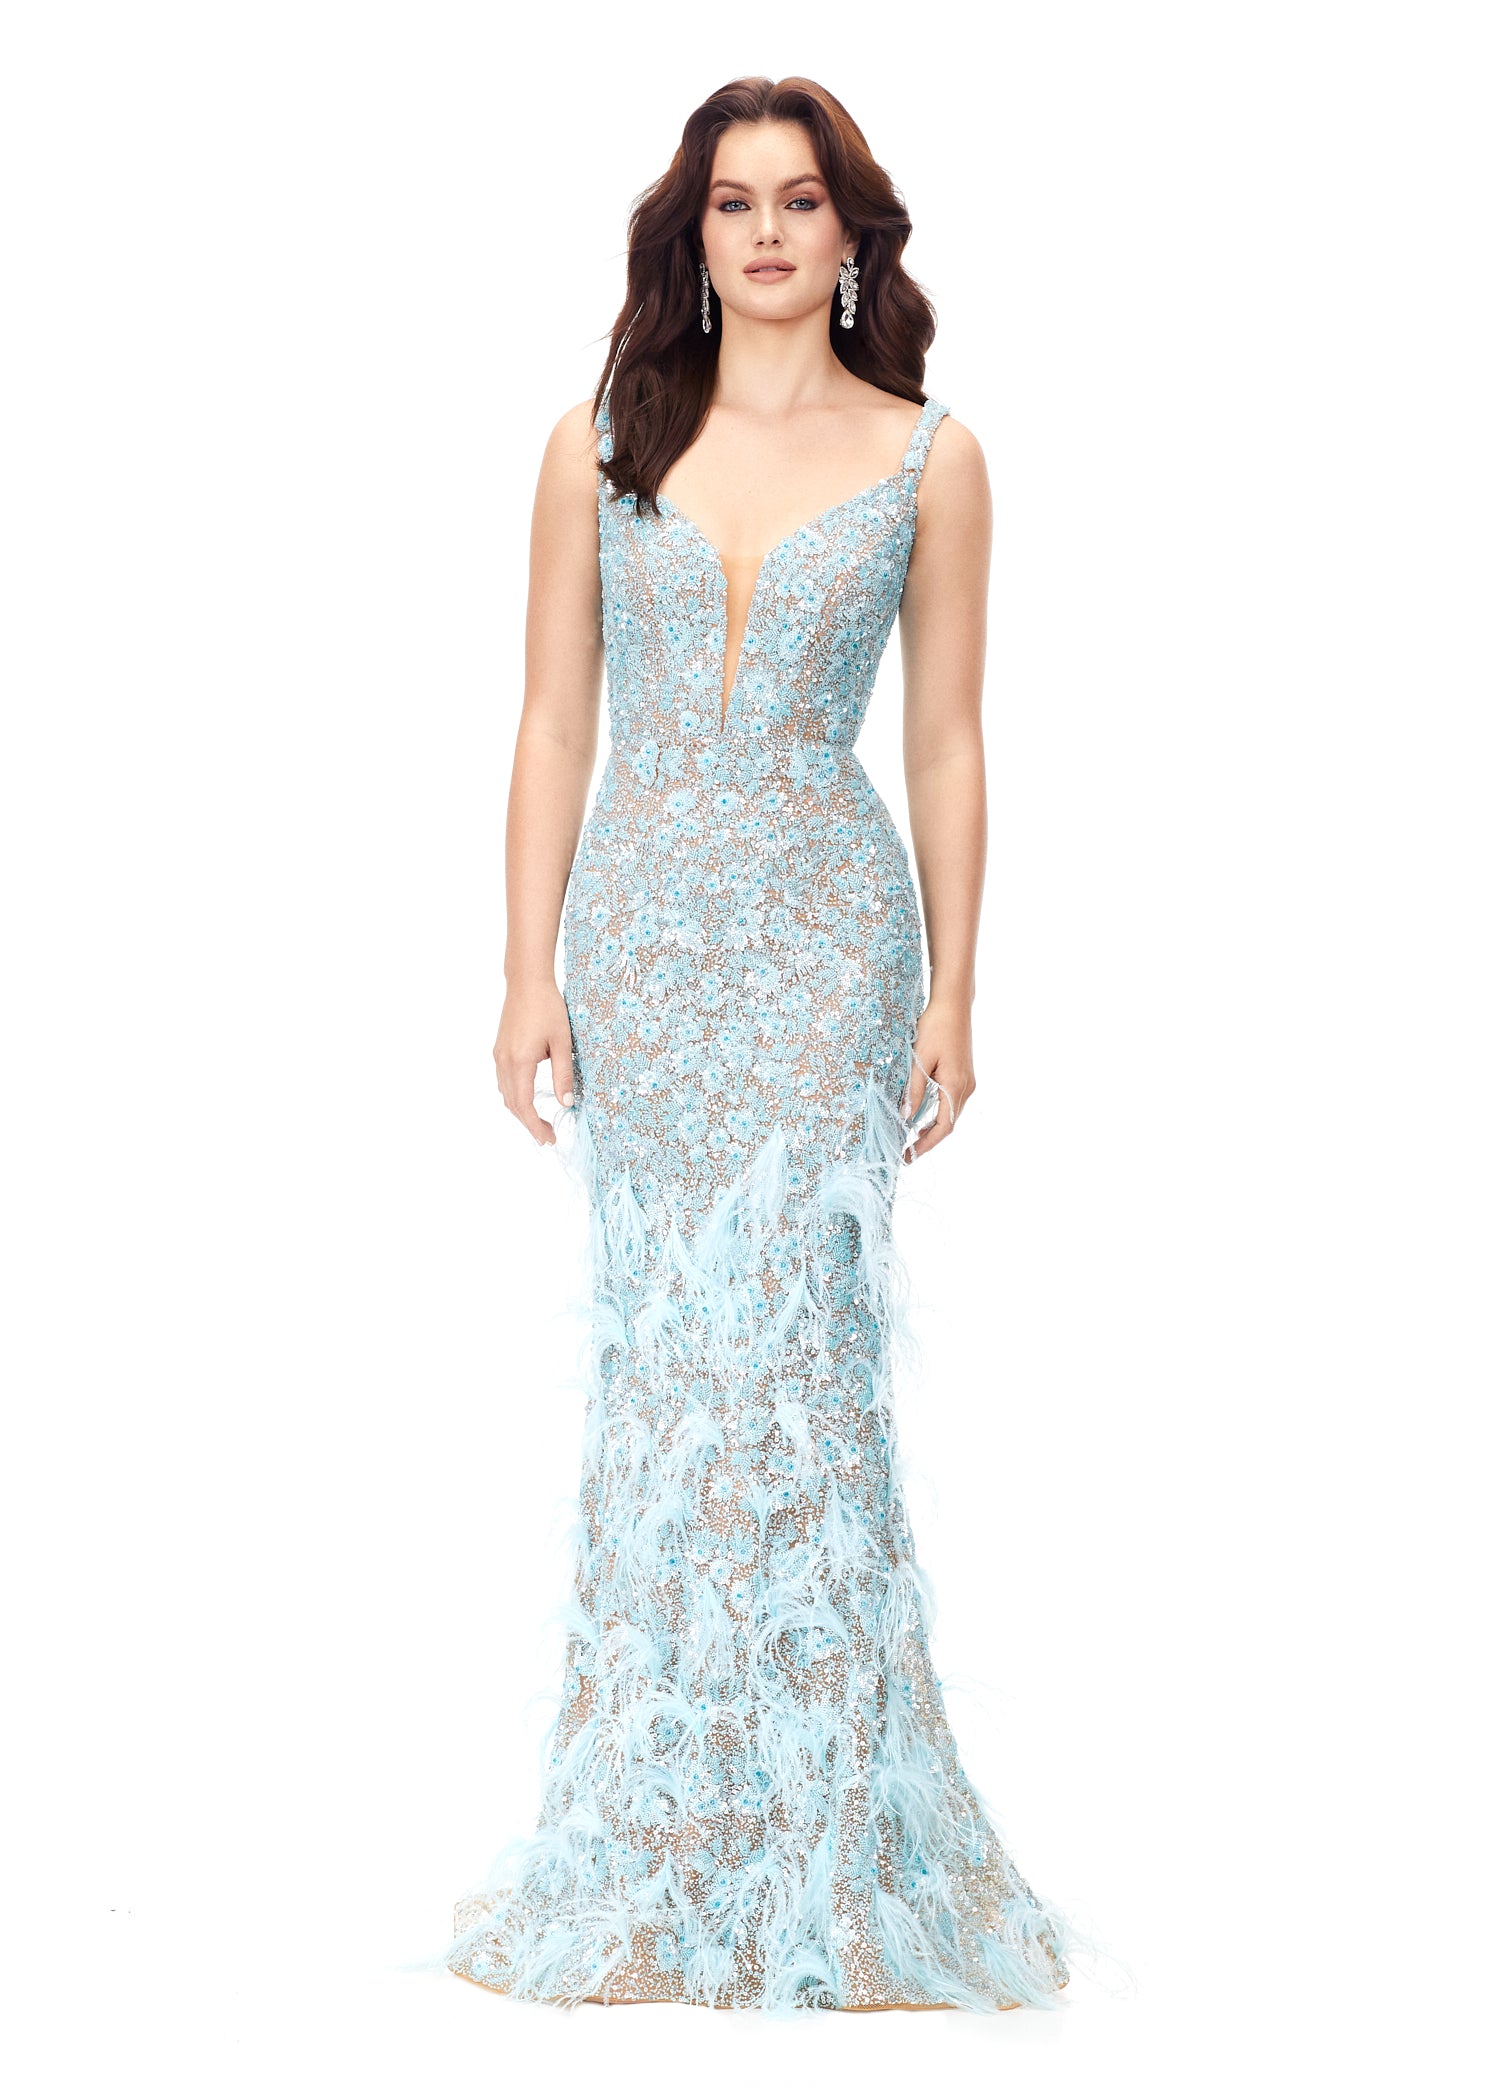 Ashley Lauren 11279 This gorgeous fitted gown features a deep illusion v-neckline and stunning beadwork throughout the entire dress. The look is complete with clusters of feathers throughout the skirt. V-Neckline Fitted Silhouette Fully Hand Beaded Feather Accents COLOR  Ice Blue